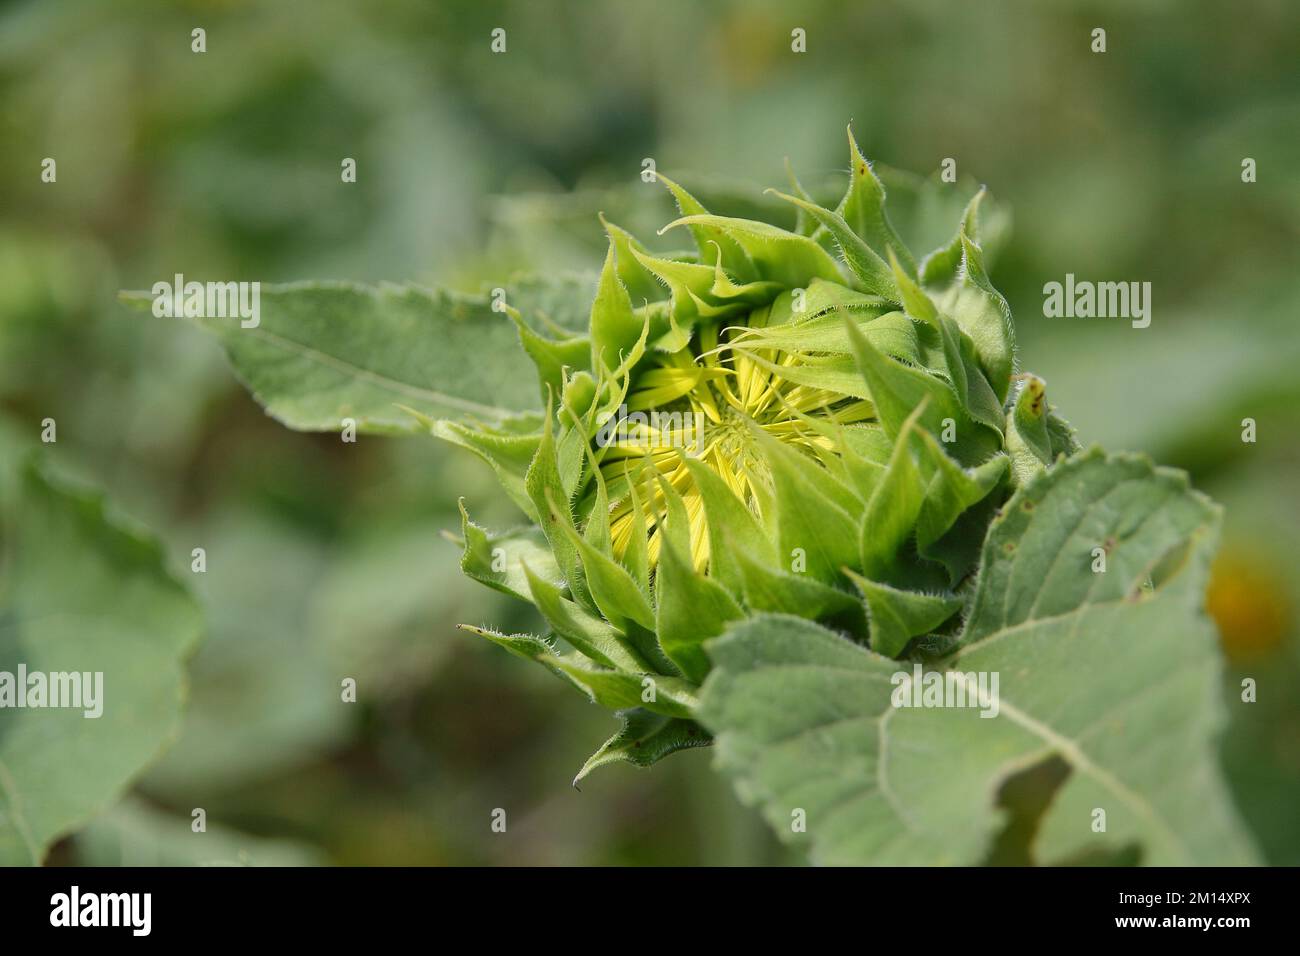 close-up view of a sunflower bud in a garden Stock Photo